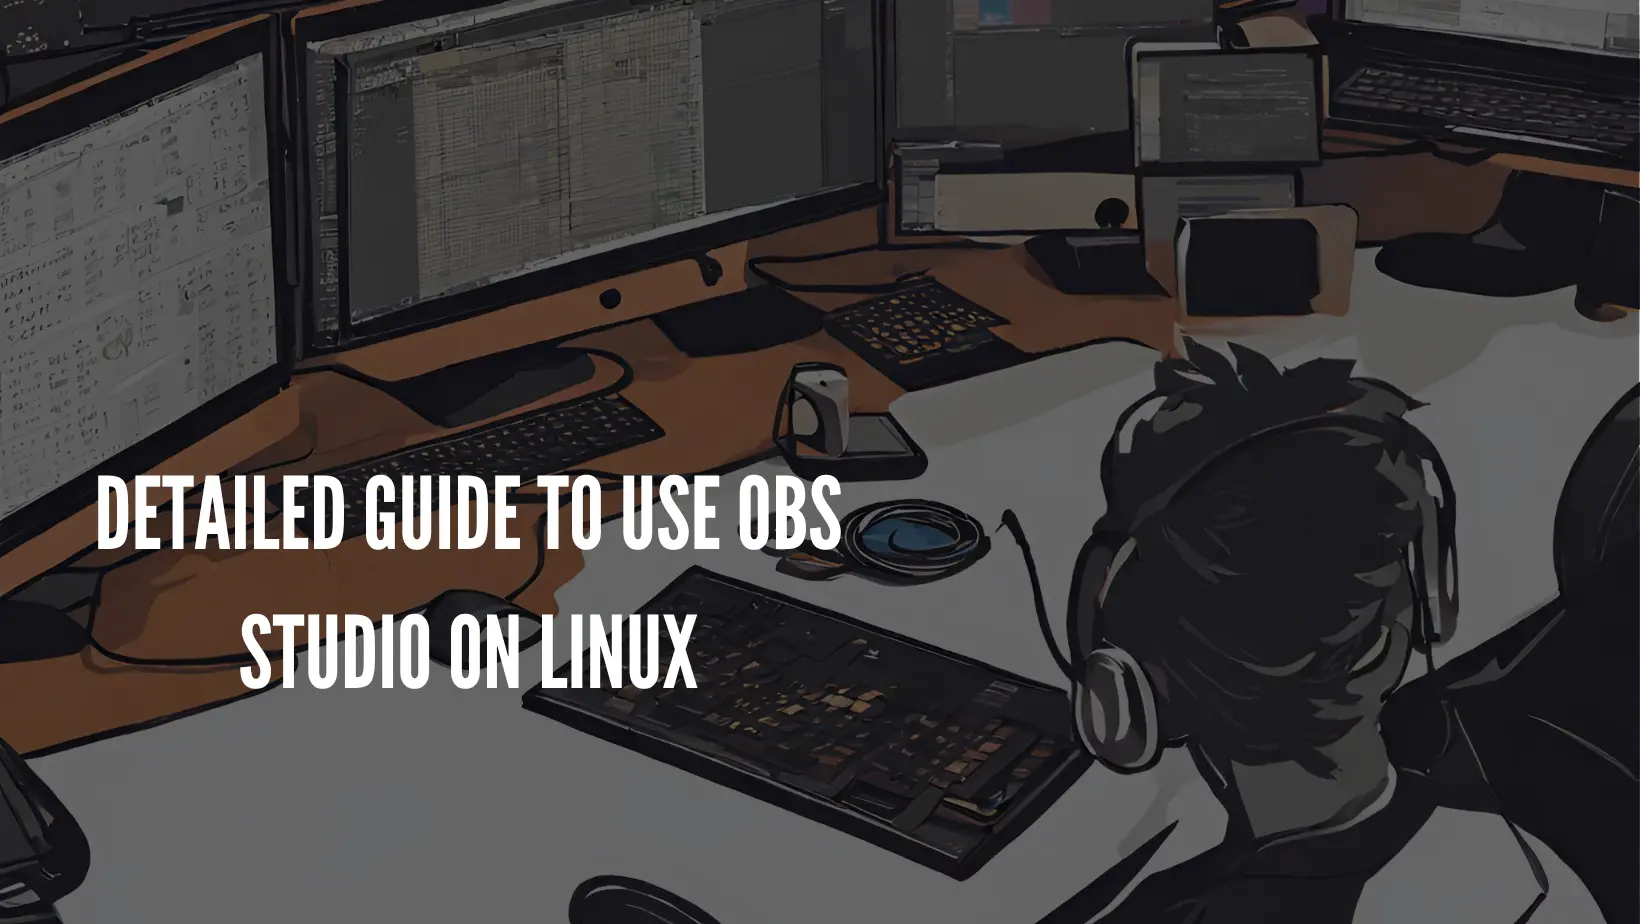 Detailed Guide to Use OBS Studio on Linux